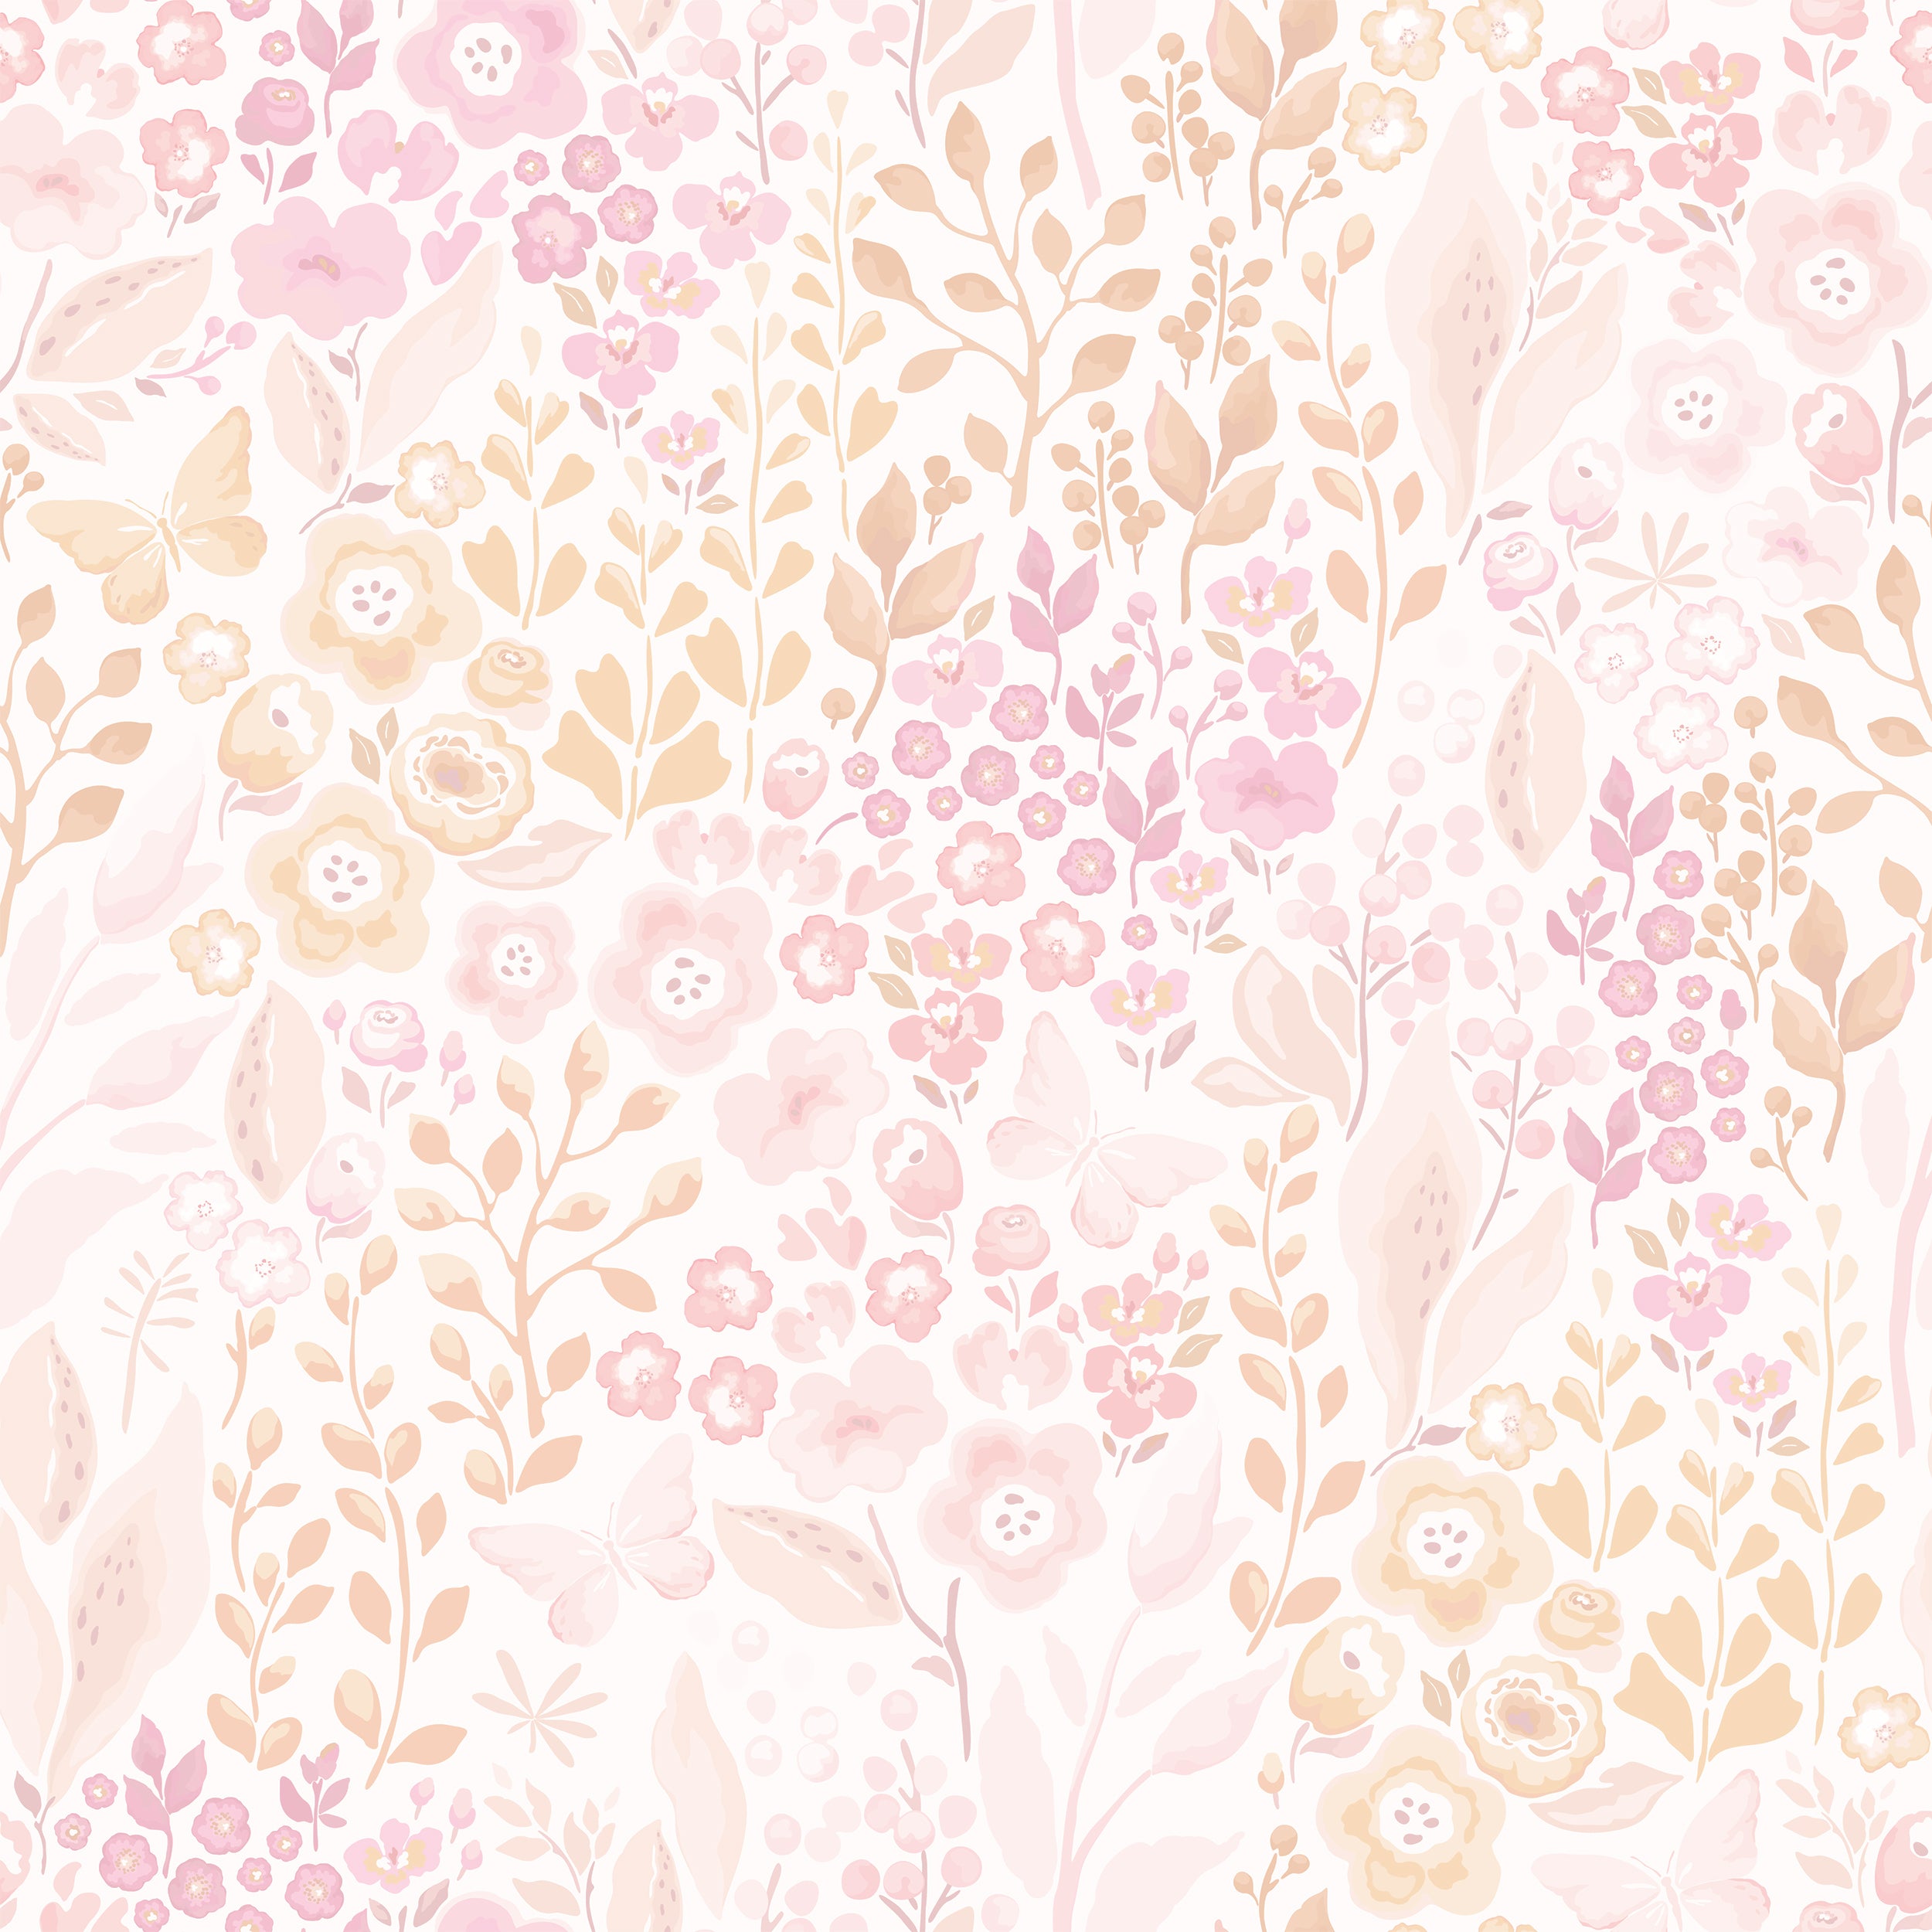 Close-up view of the 'Pretty Petals Wallpaper', showcasing the intricate details of its pastel floral pattern. The wallpaper features a variety of blooming flowers and butterflies, evoking a serene, garden-like atmosphere.